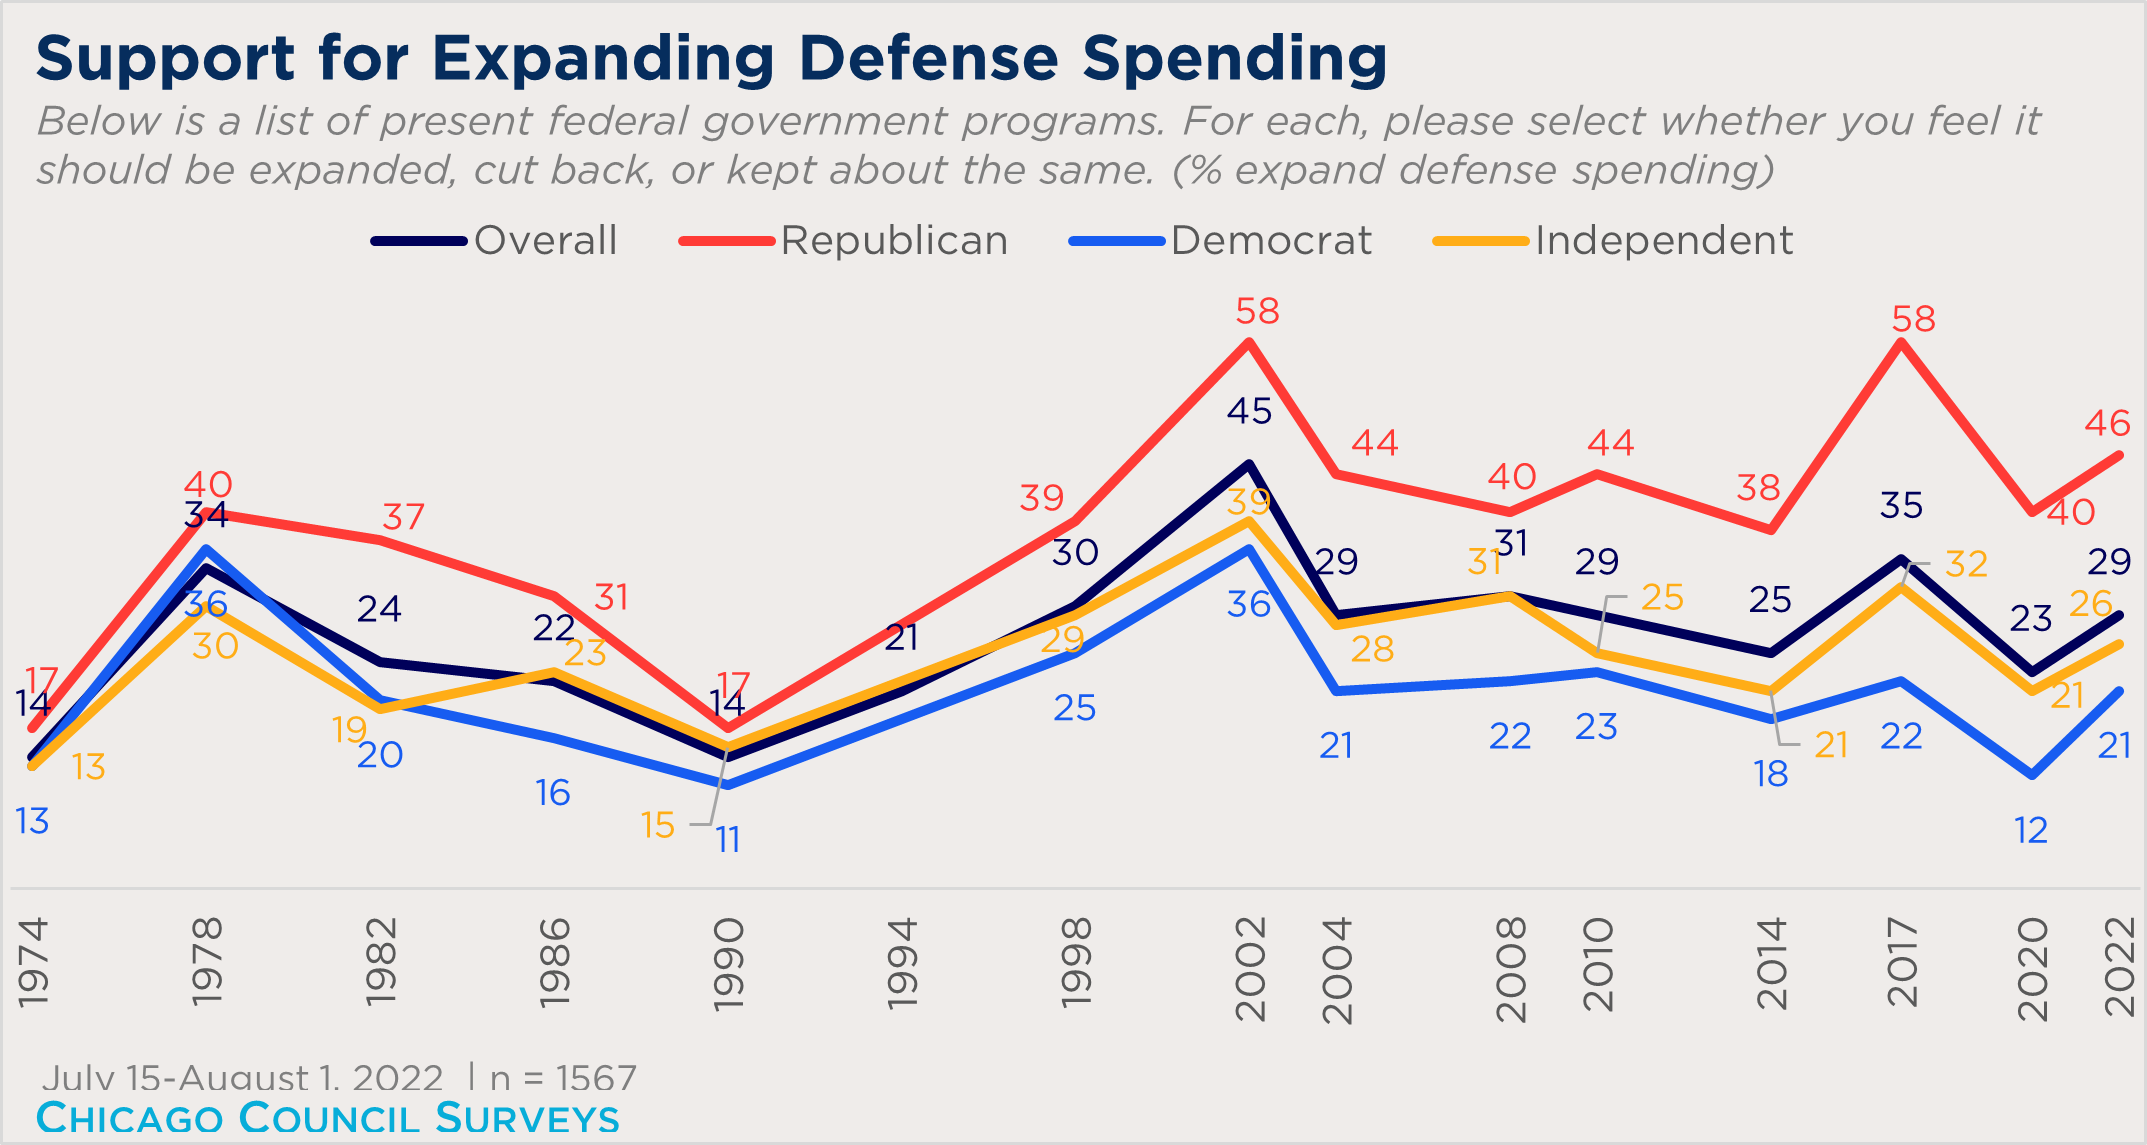 "line chart showing support for expanding defense spending over time"